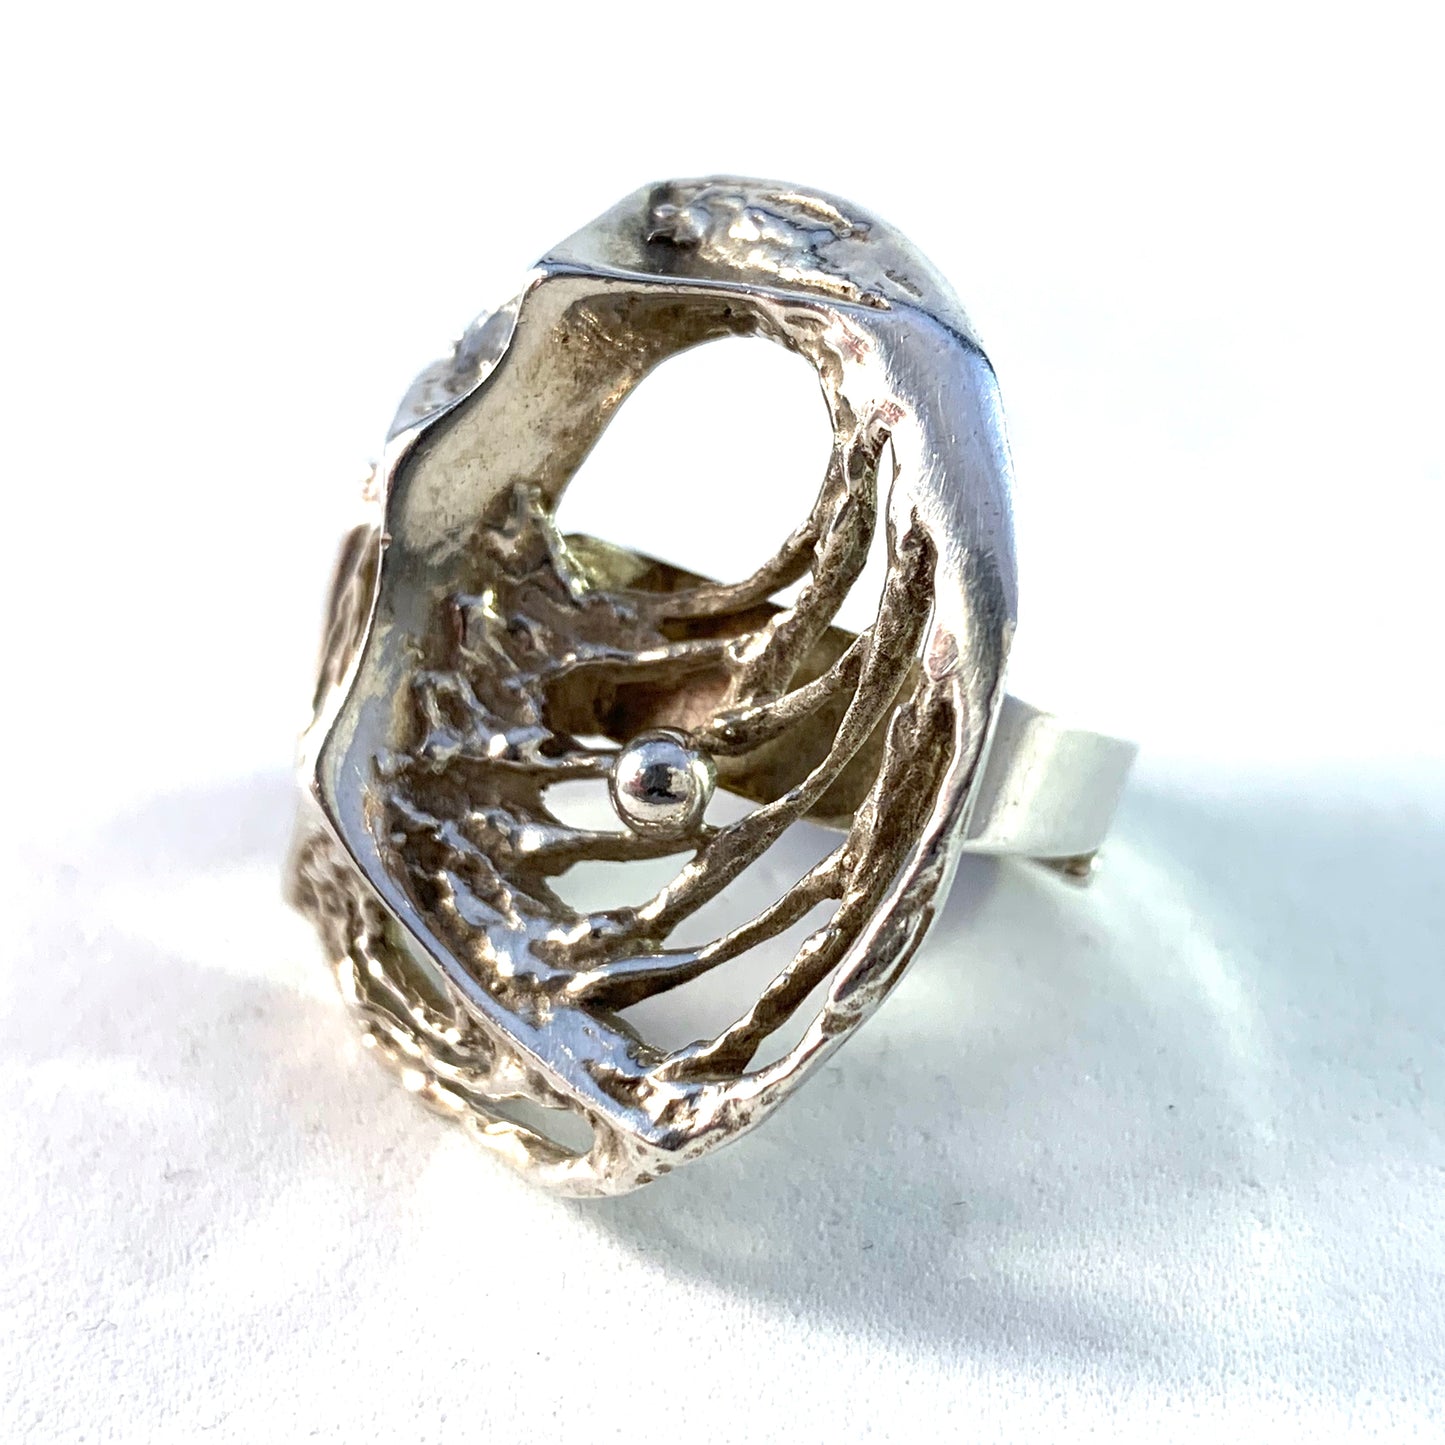 Sten & Laine Finland year 1976 Bold Large Sterling Silver Ring. Spider Web Design